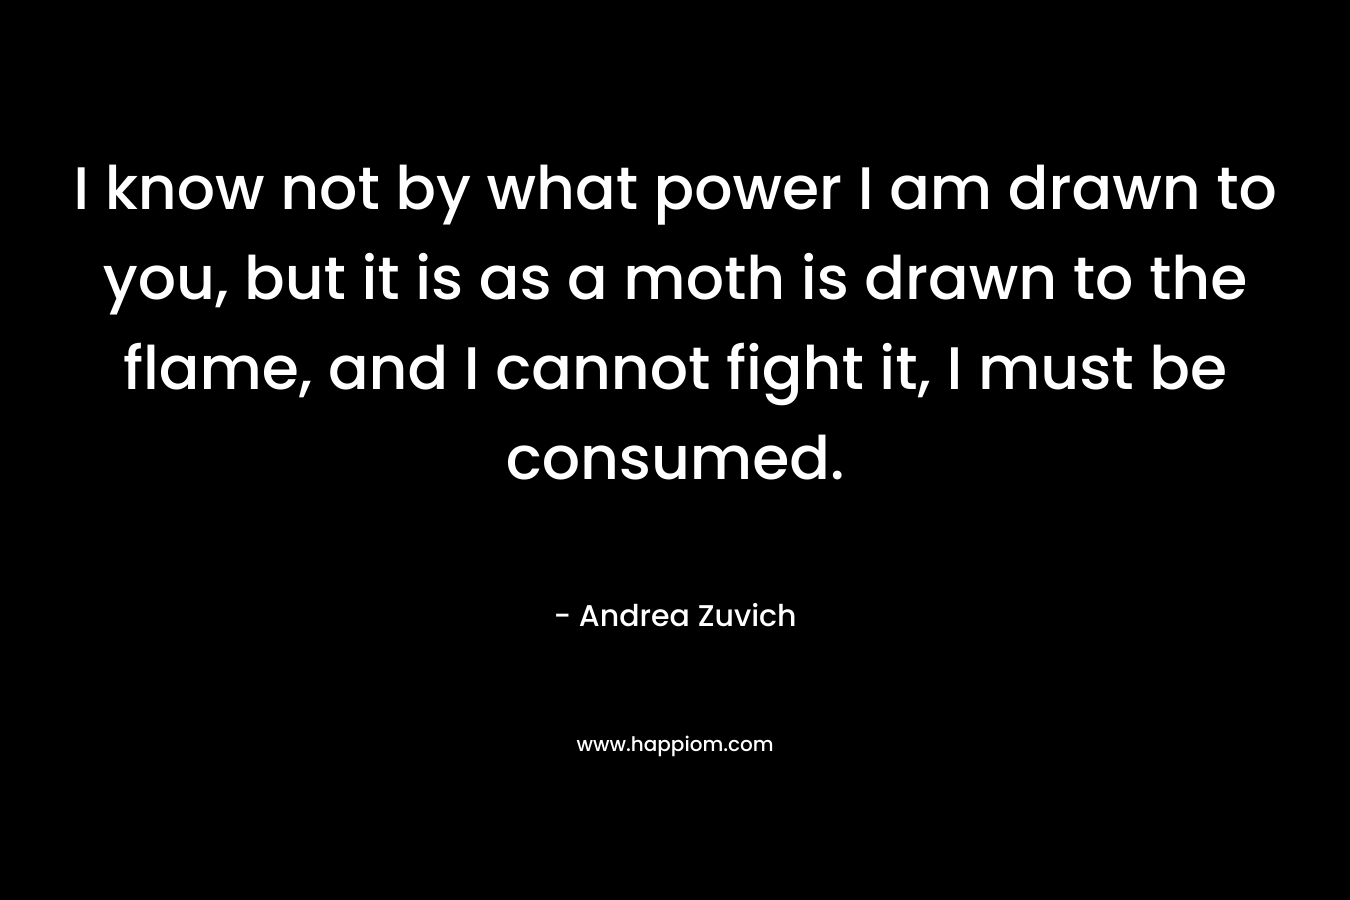 I know not by what power I am drawn to you, but it is as a moth is drawn to the flame, and I cannot fight it, I must be consumed. – Andrea Zuvich